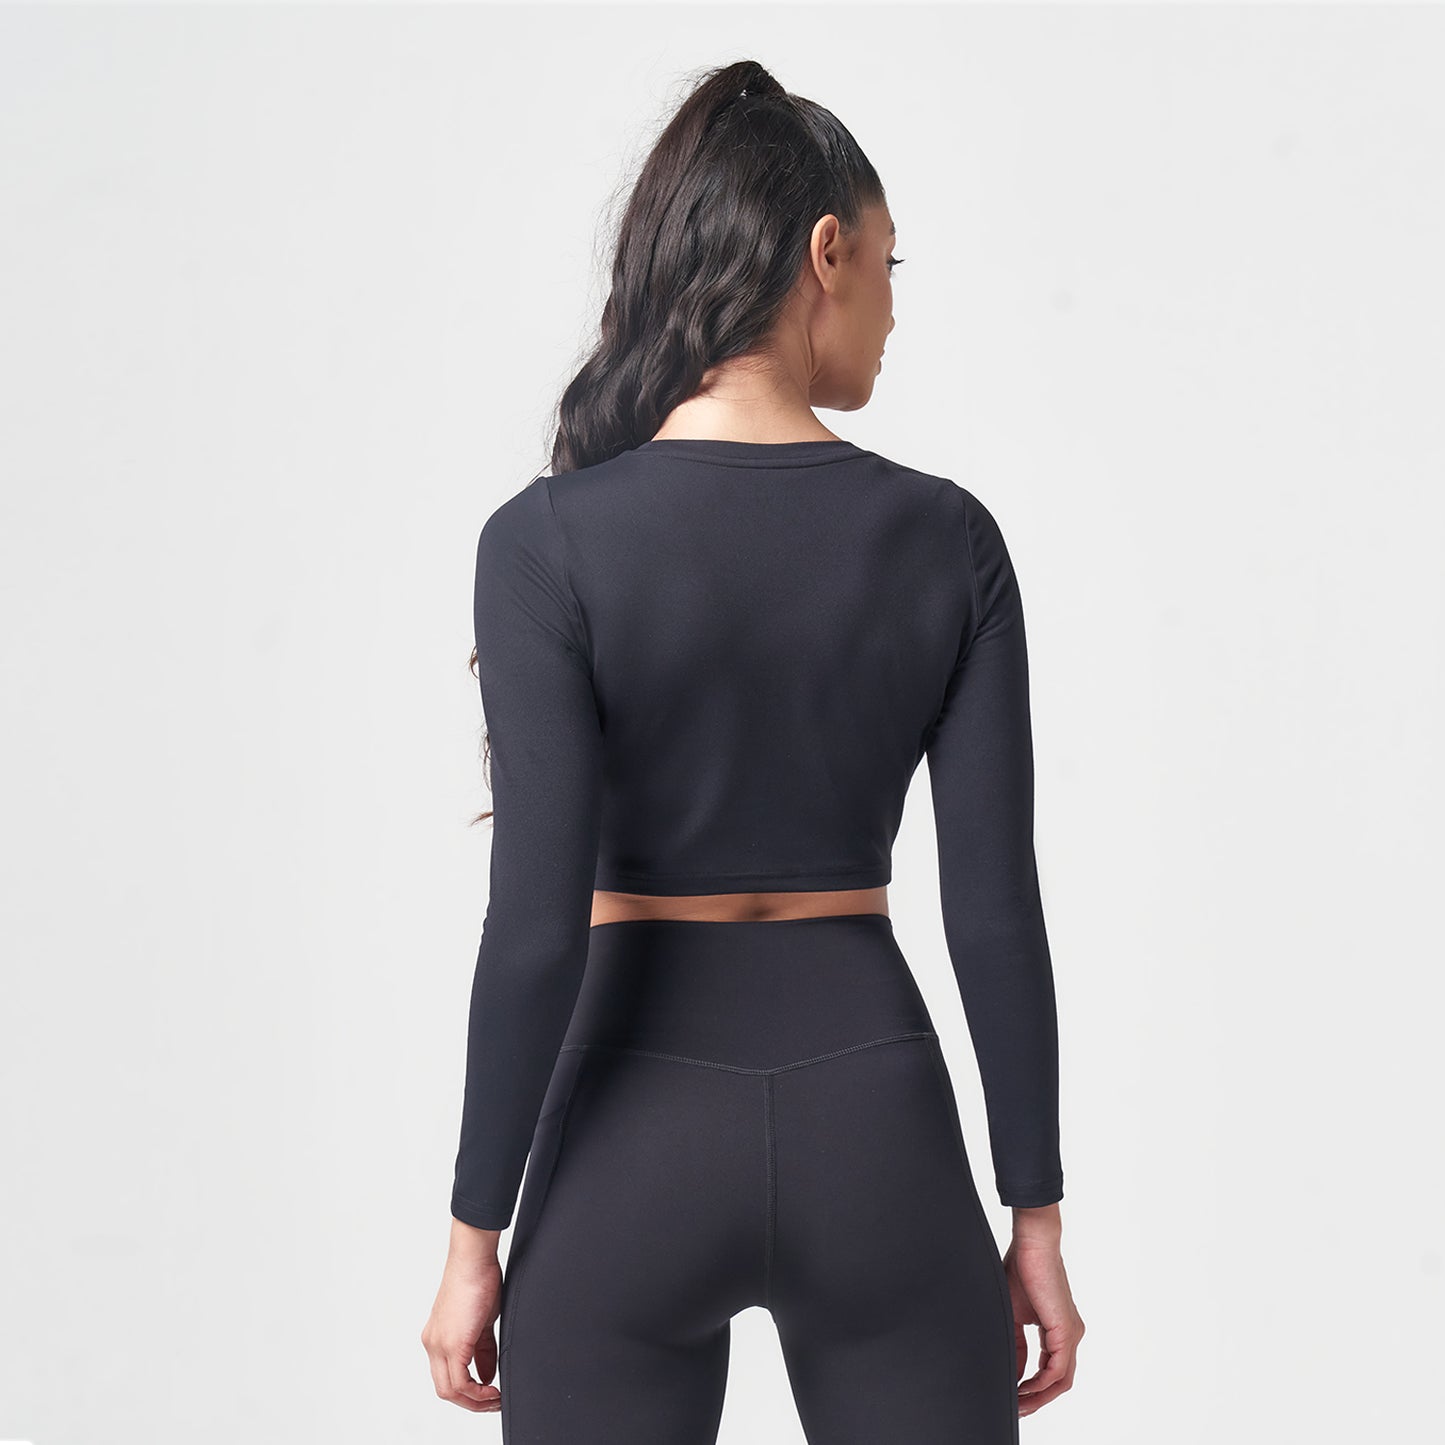 squatwolf-gym-wear-essential-full-sleeves-crop-top-black-workout-top-for-women